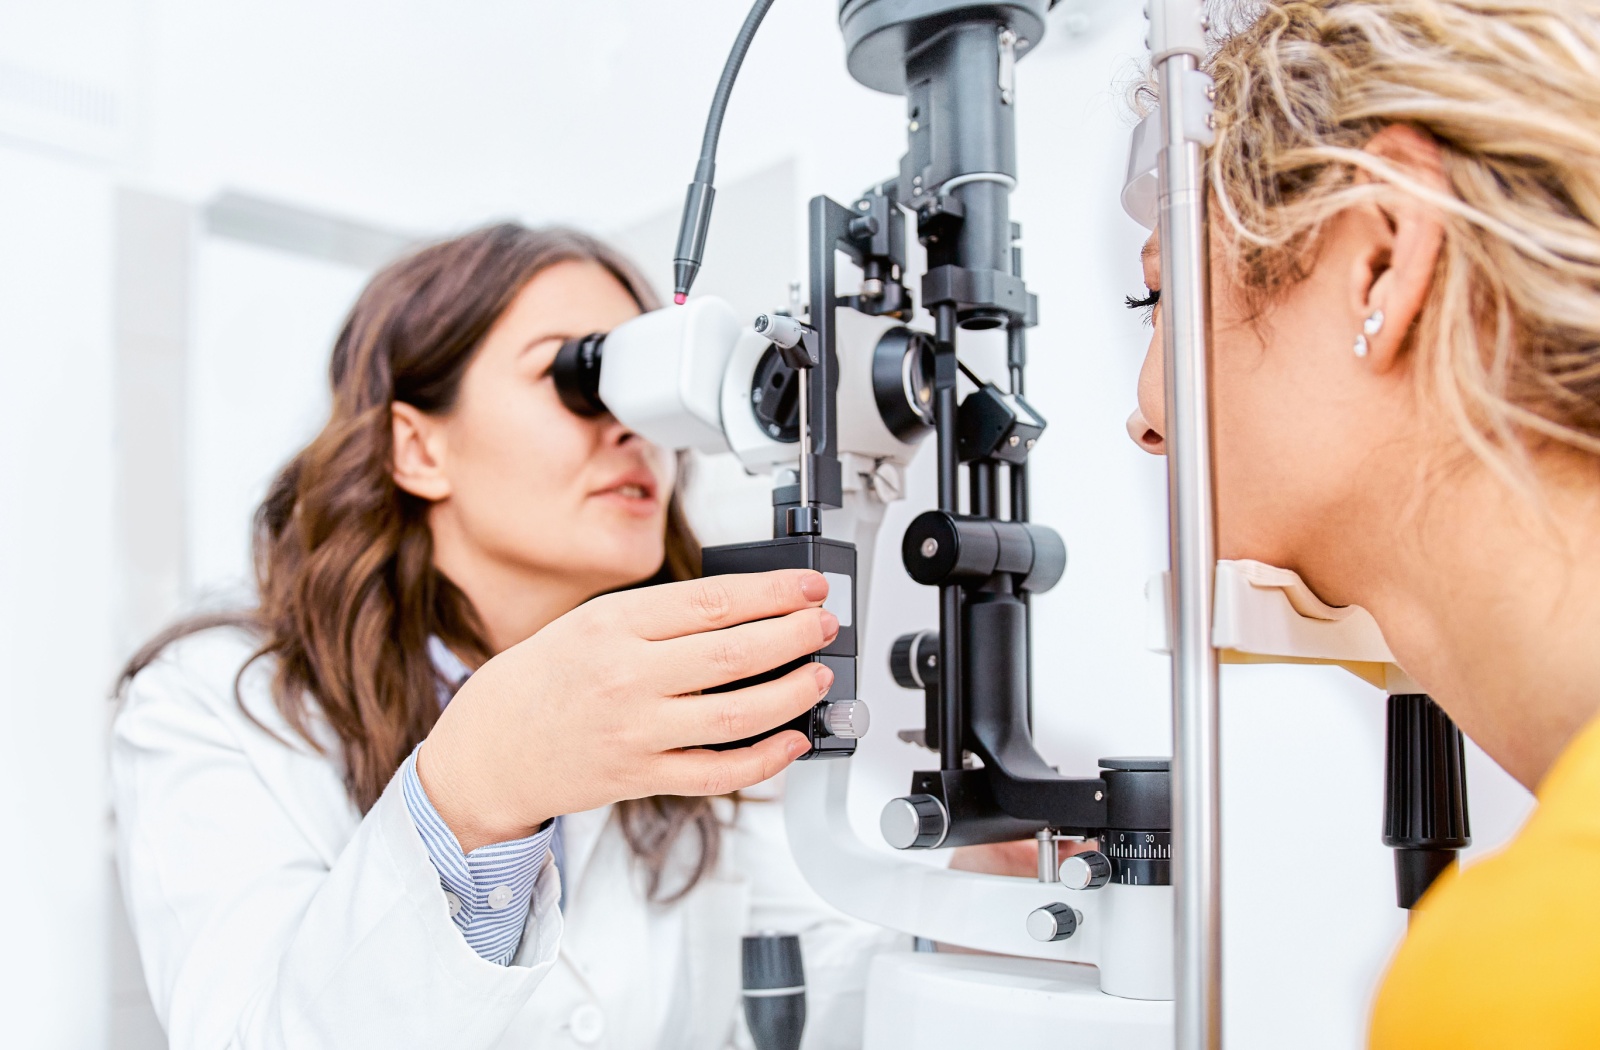 An optometrist conducting an eye exam with a female patient